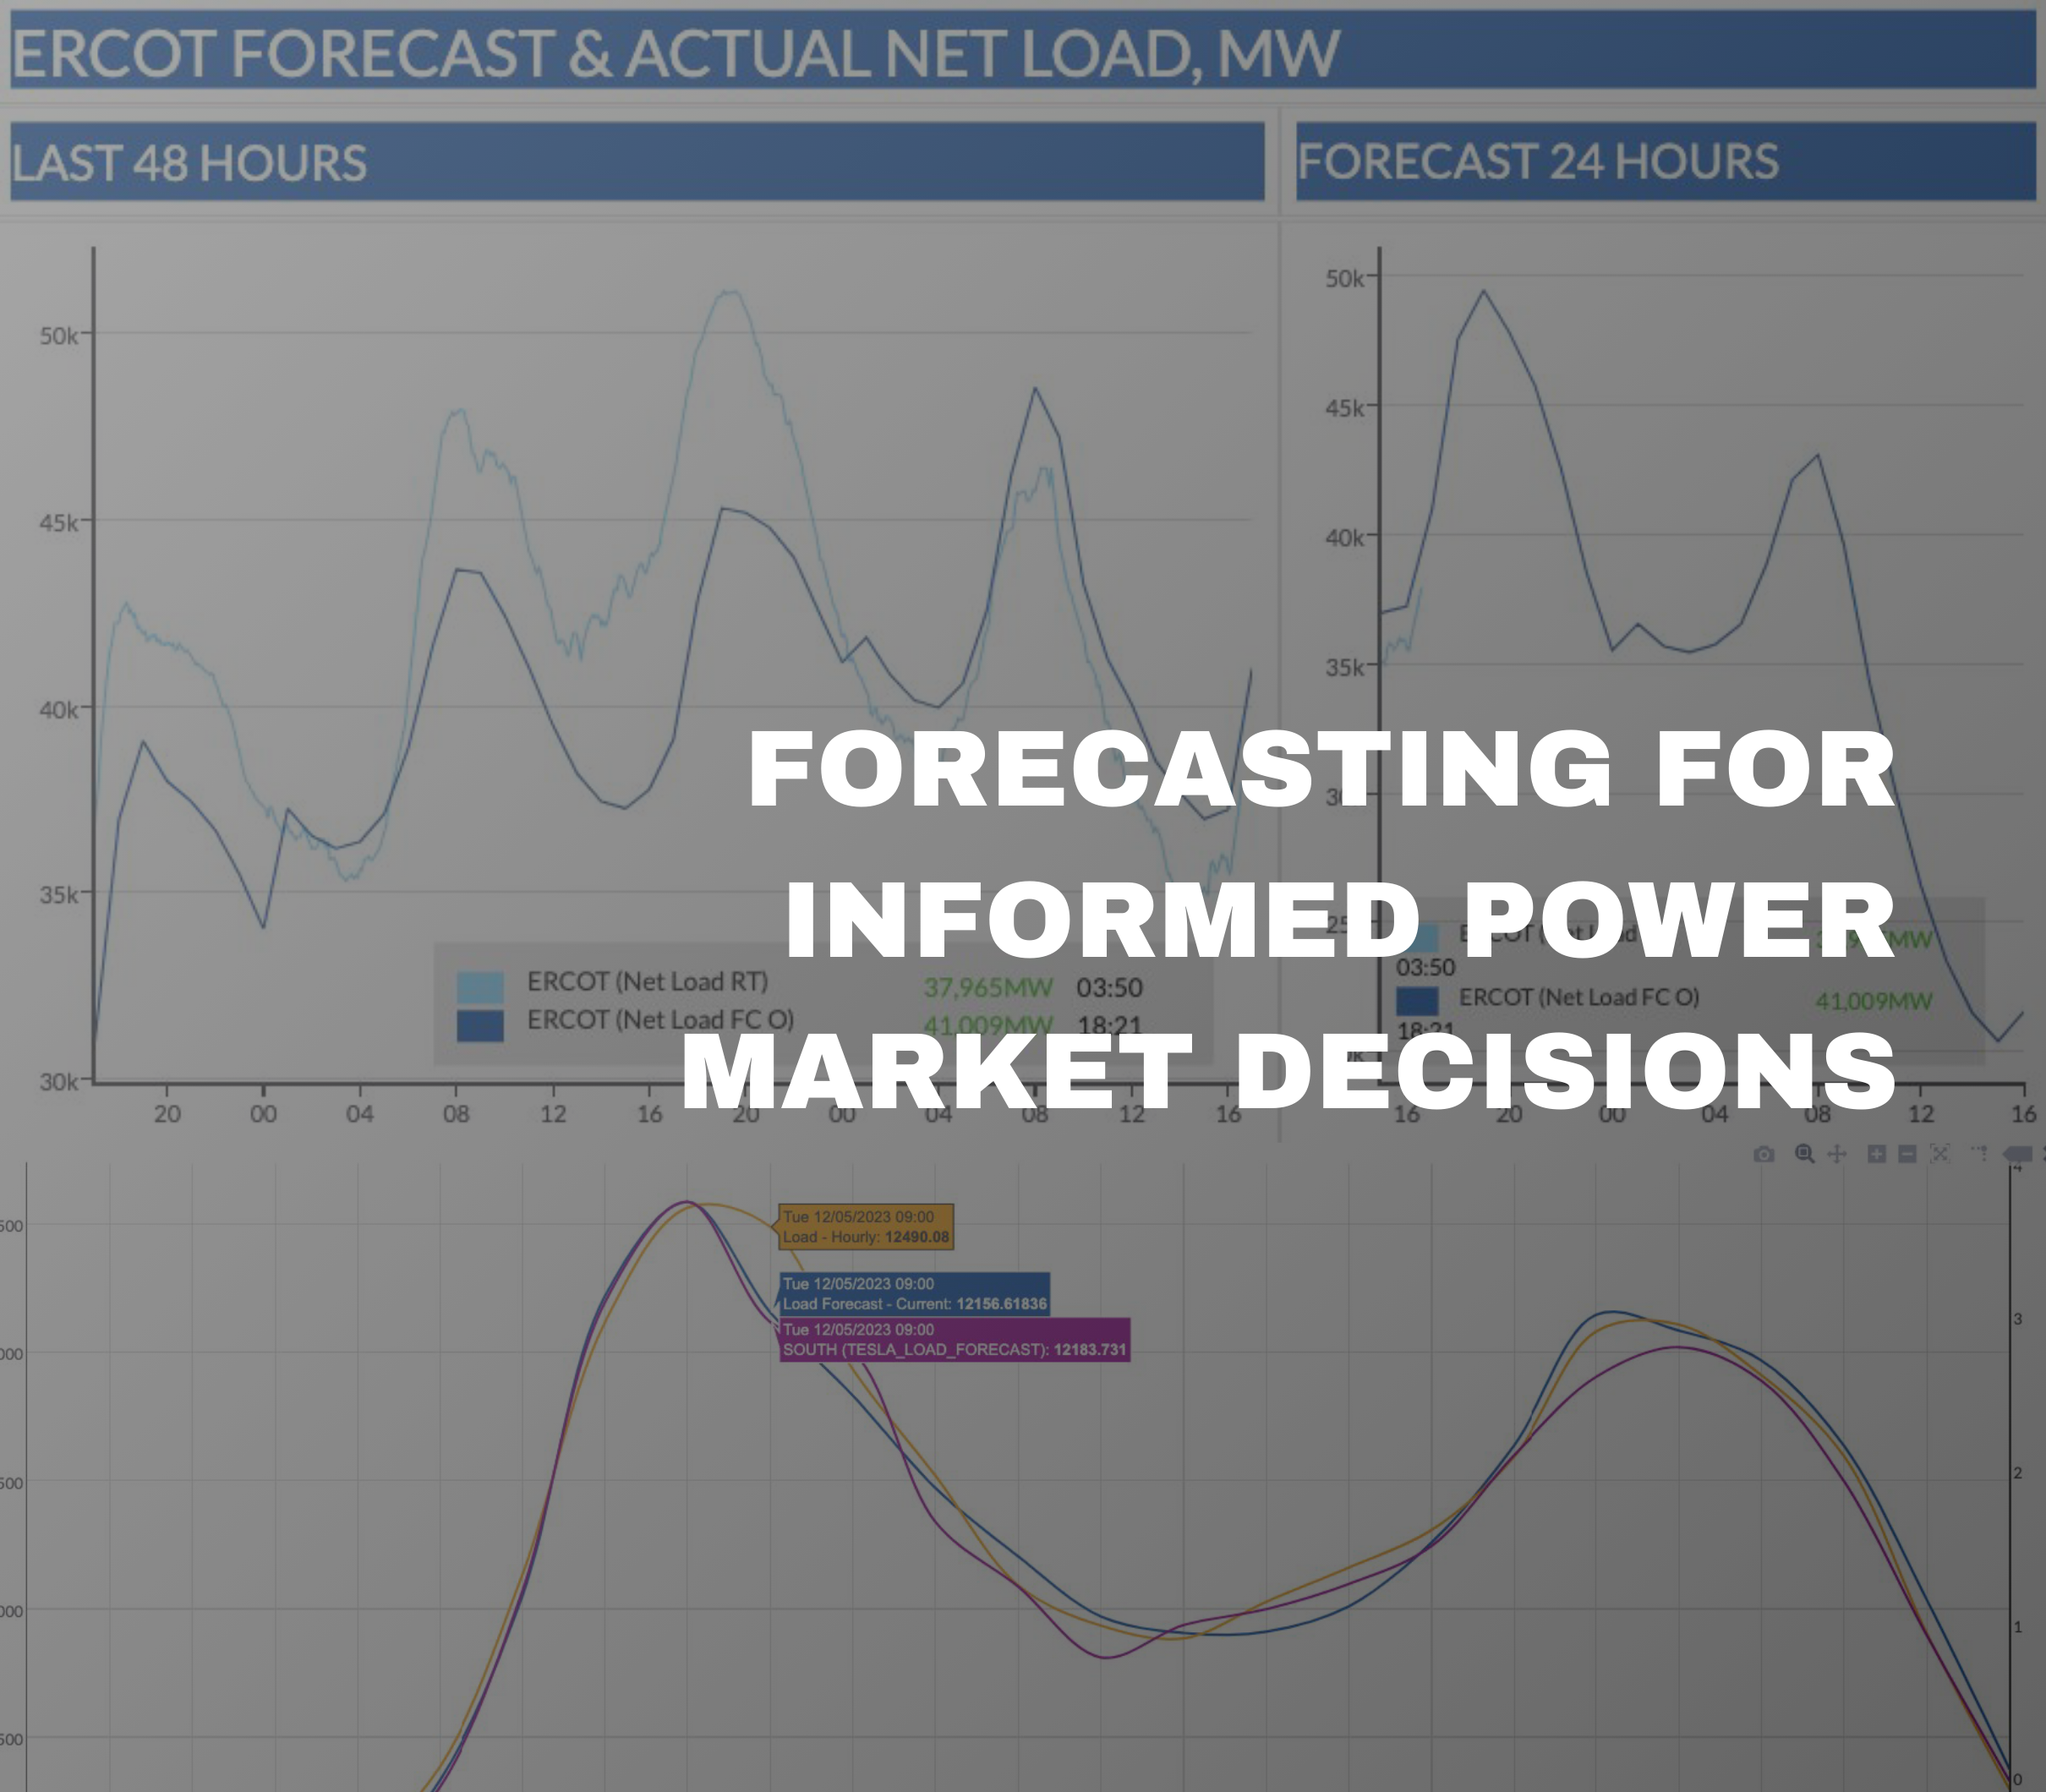 energy demand forecasting software for informed power market decisions